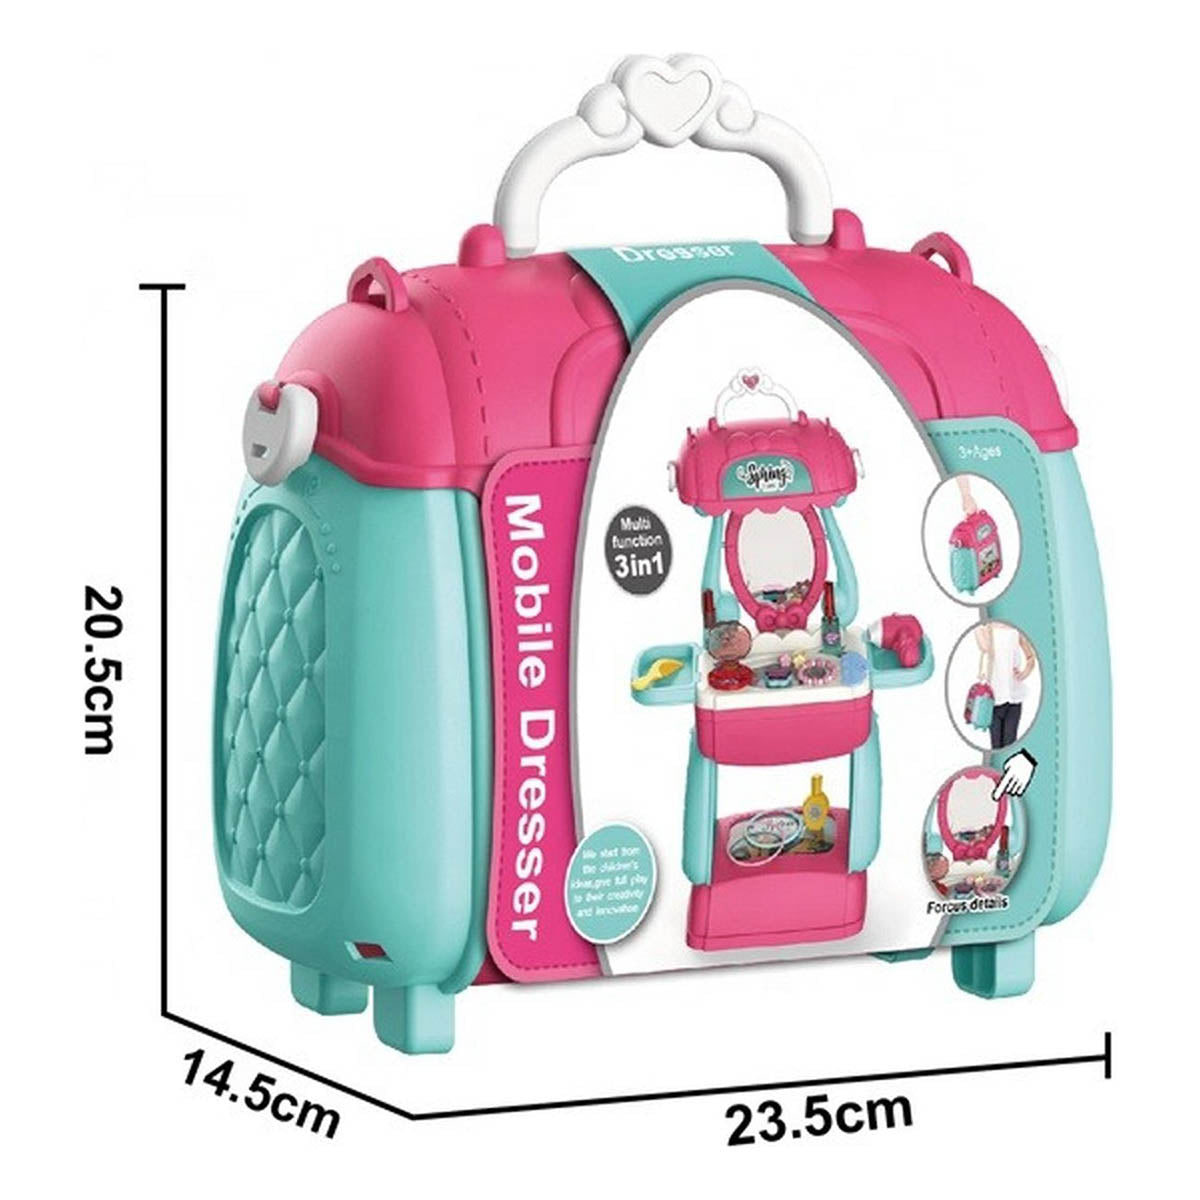 <tc>Ariko</tc> Toy suitcase Beauty salon 31 pieces - Hair dryer, mirror, make-up, perfume and much more - handy take-along suitcase